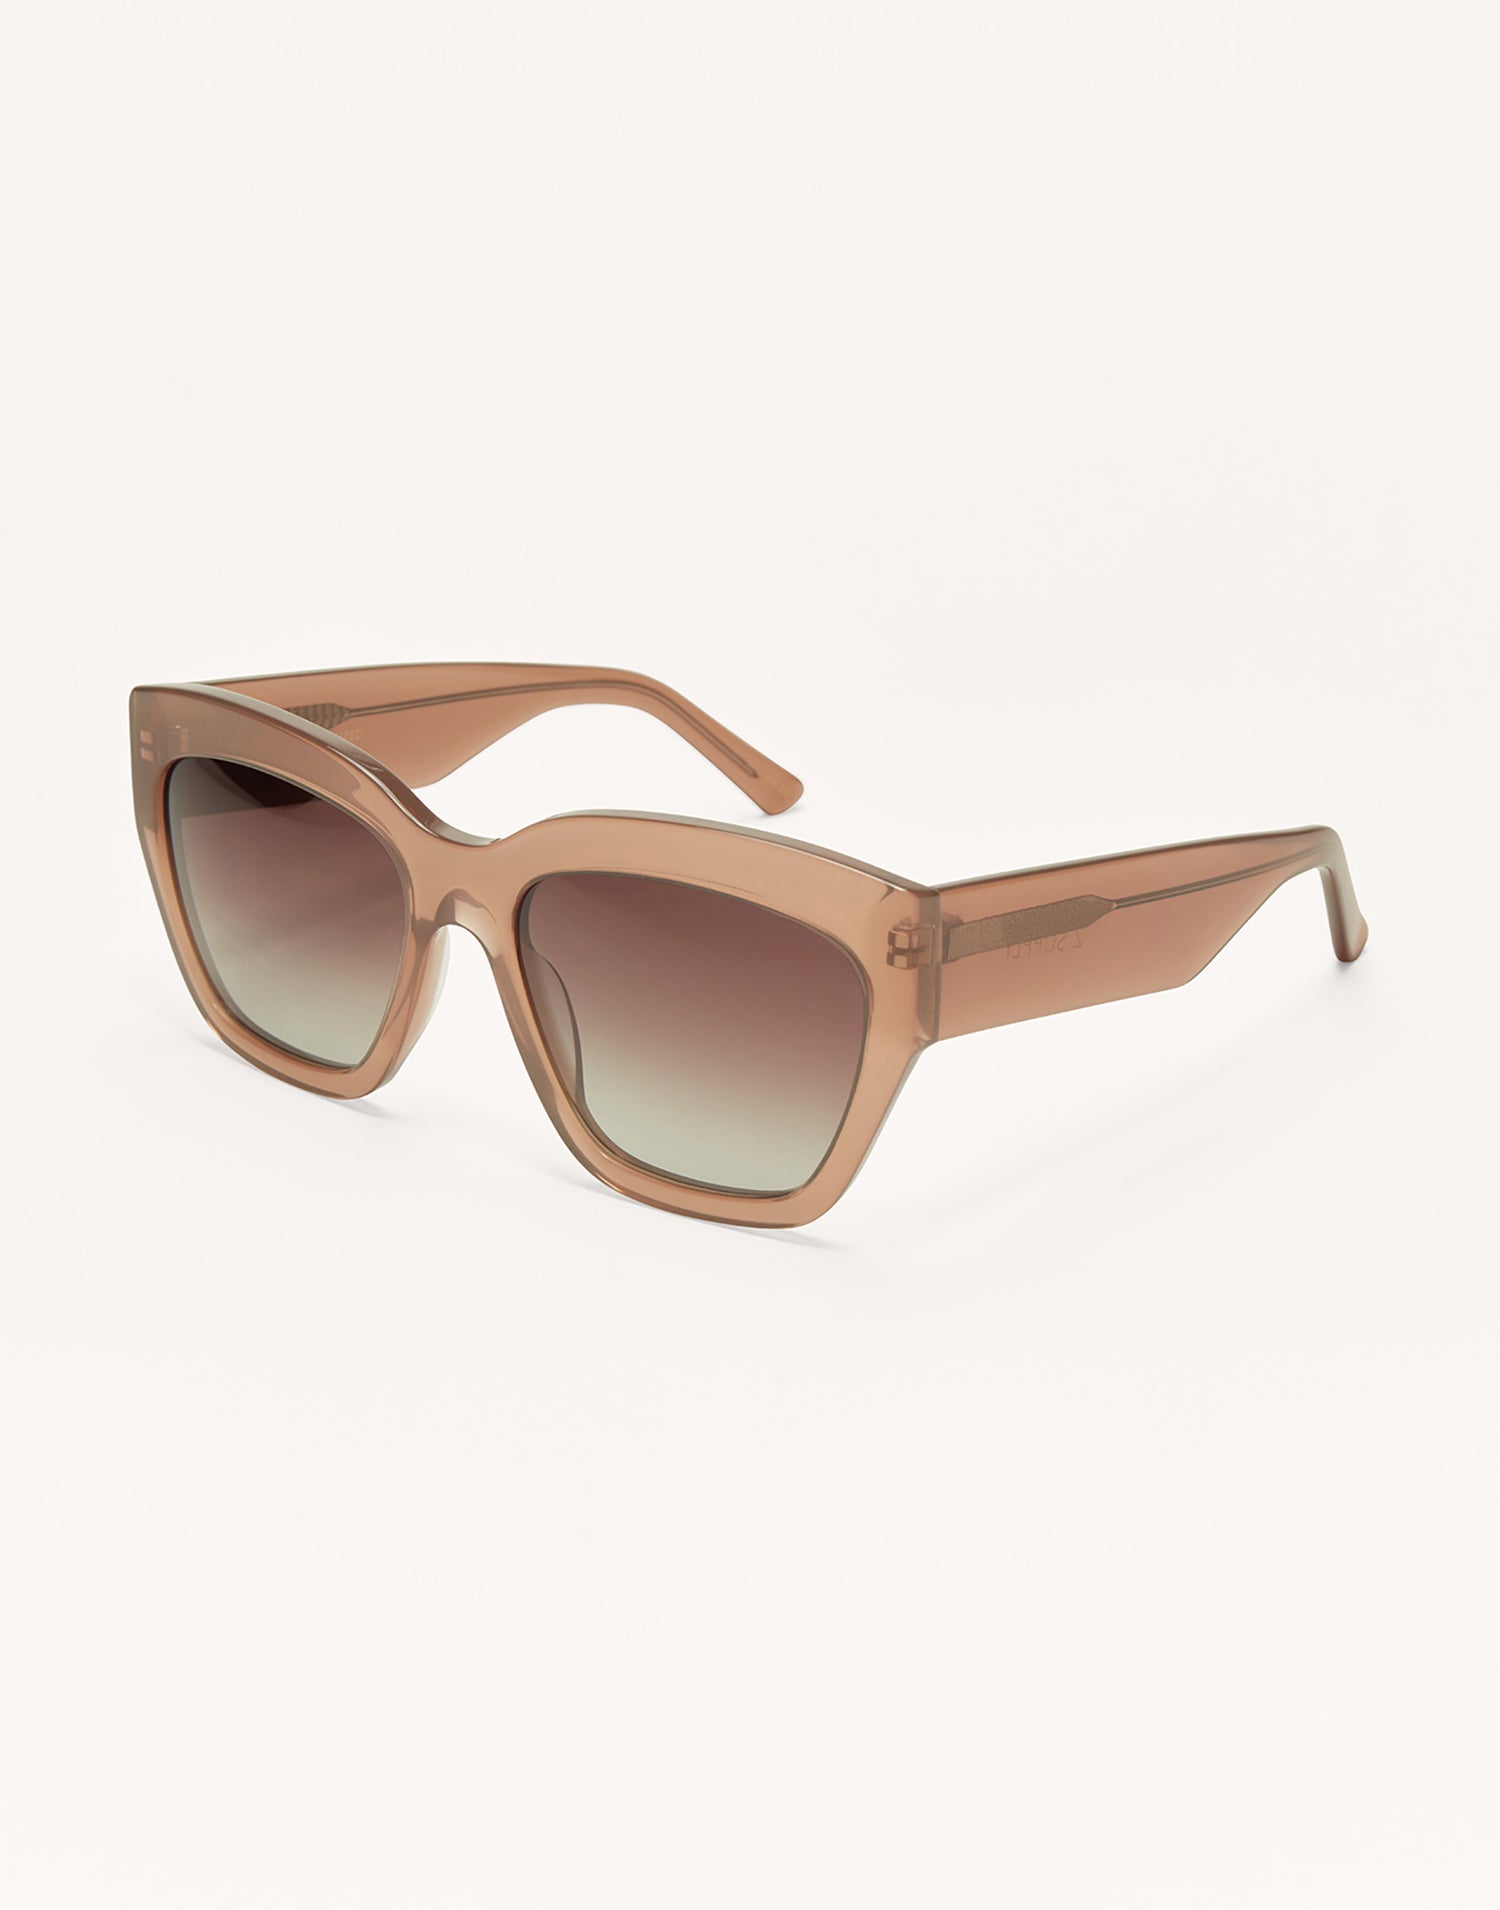 Iconic Sunglasses by Z Supply in Taupe - Angled View